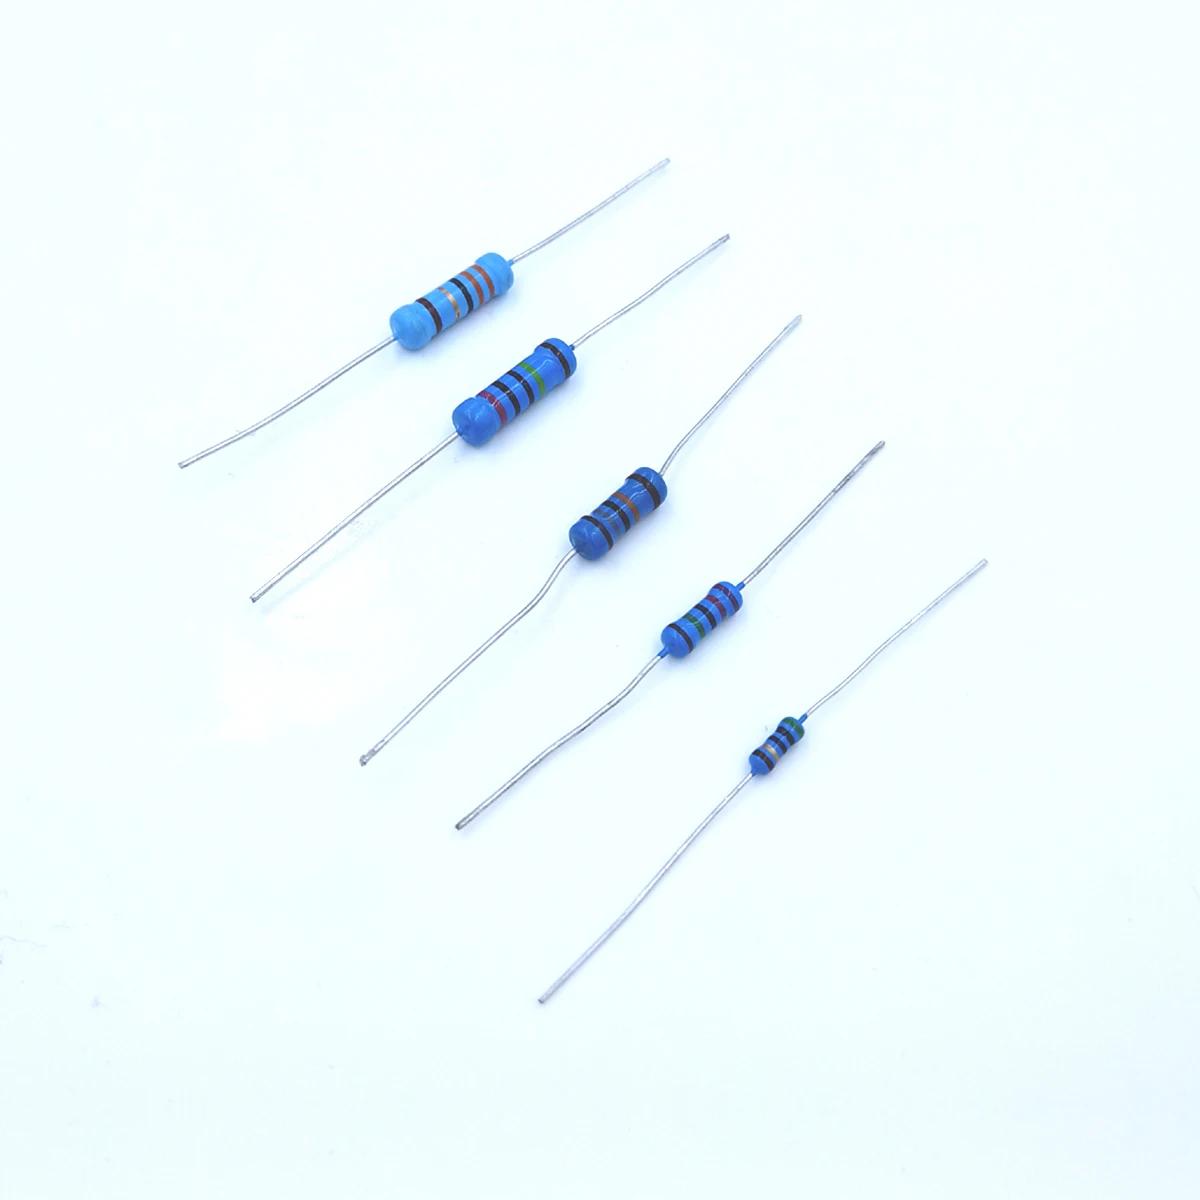 

100Pcs 47R 51R 56R 62R 47Ohm 51Ohm 56Ohm 62Ohm 47 51 56 62 R Ohm 1/2W 0.5W 1% Metal Film Resistor Colored ring Resistance